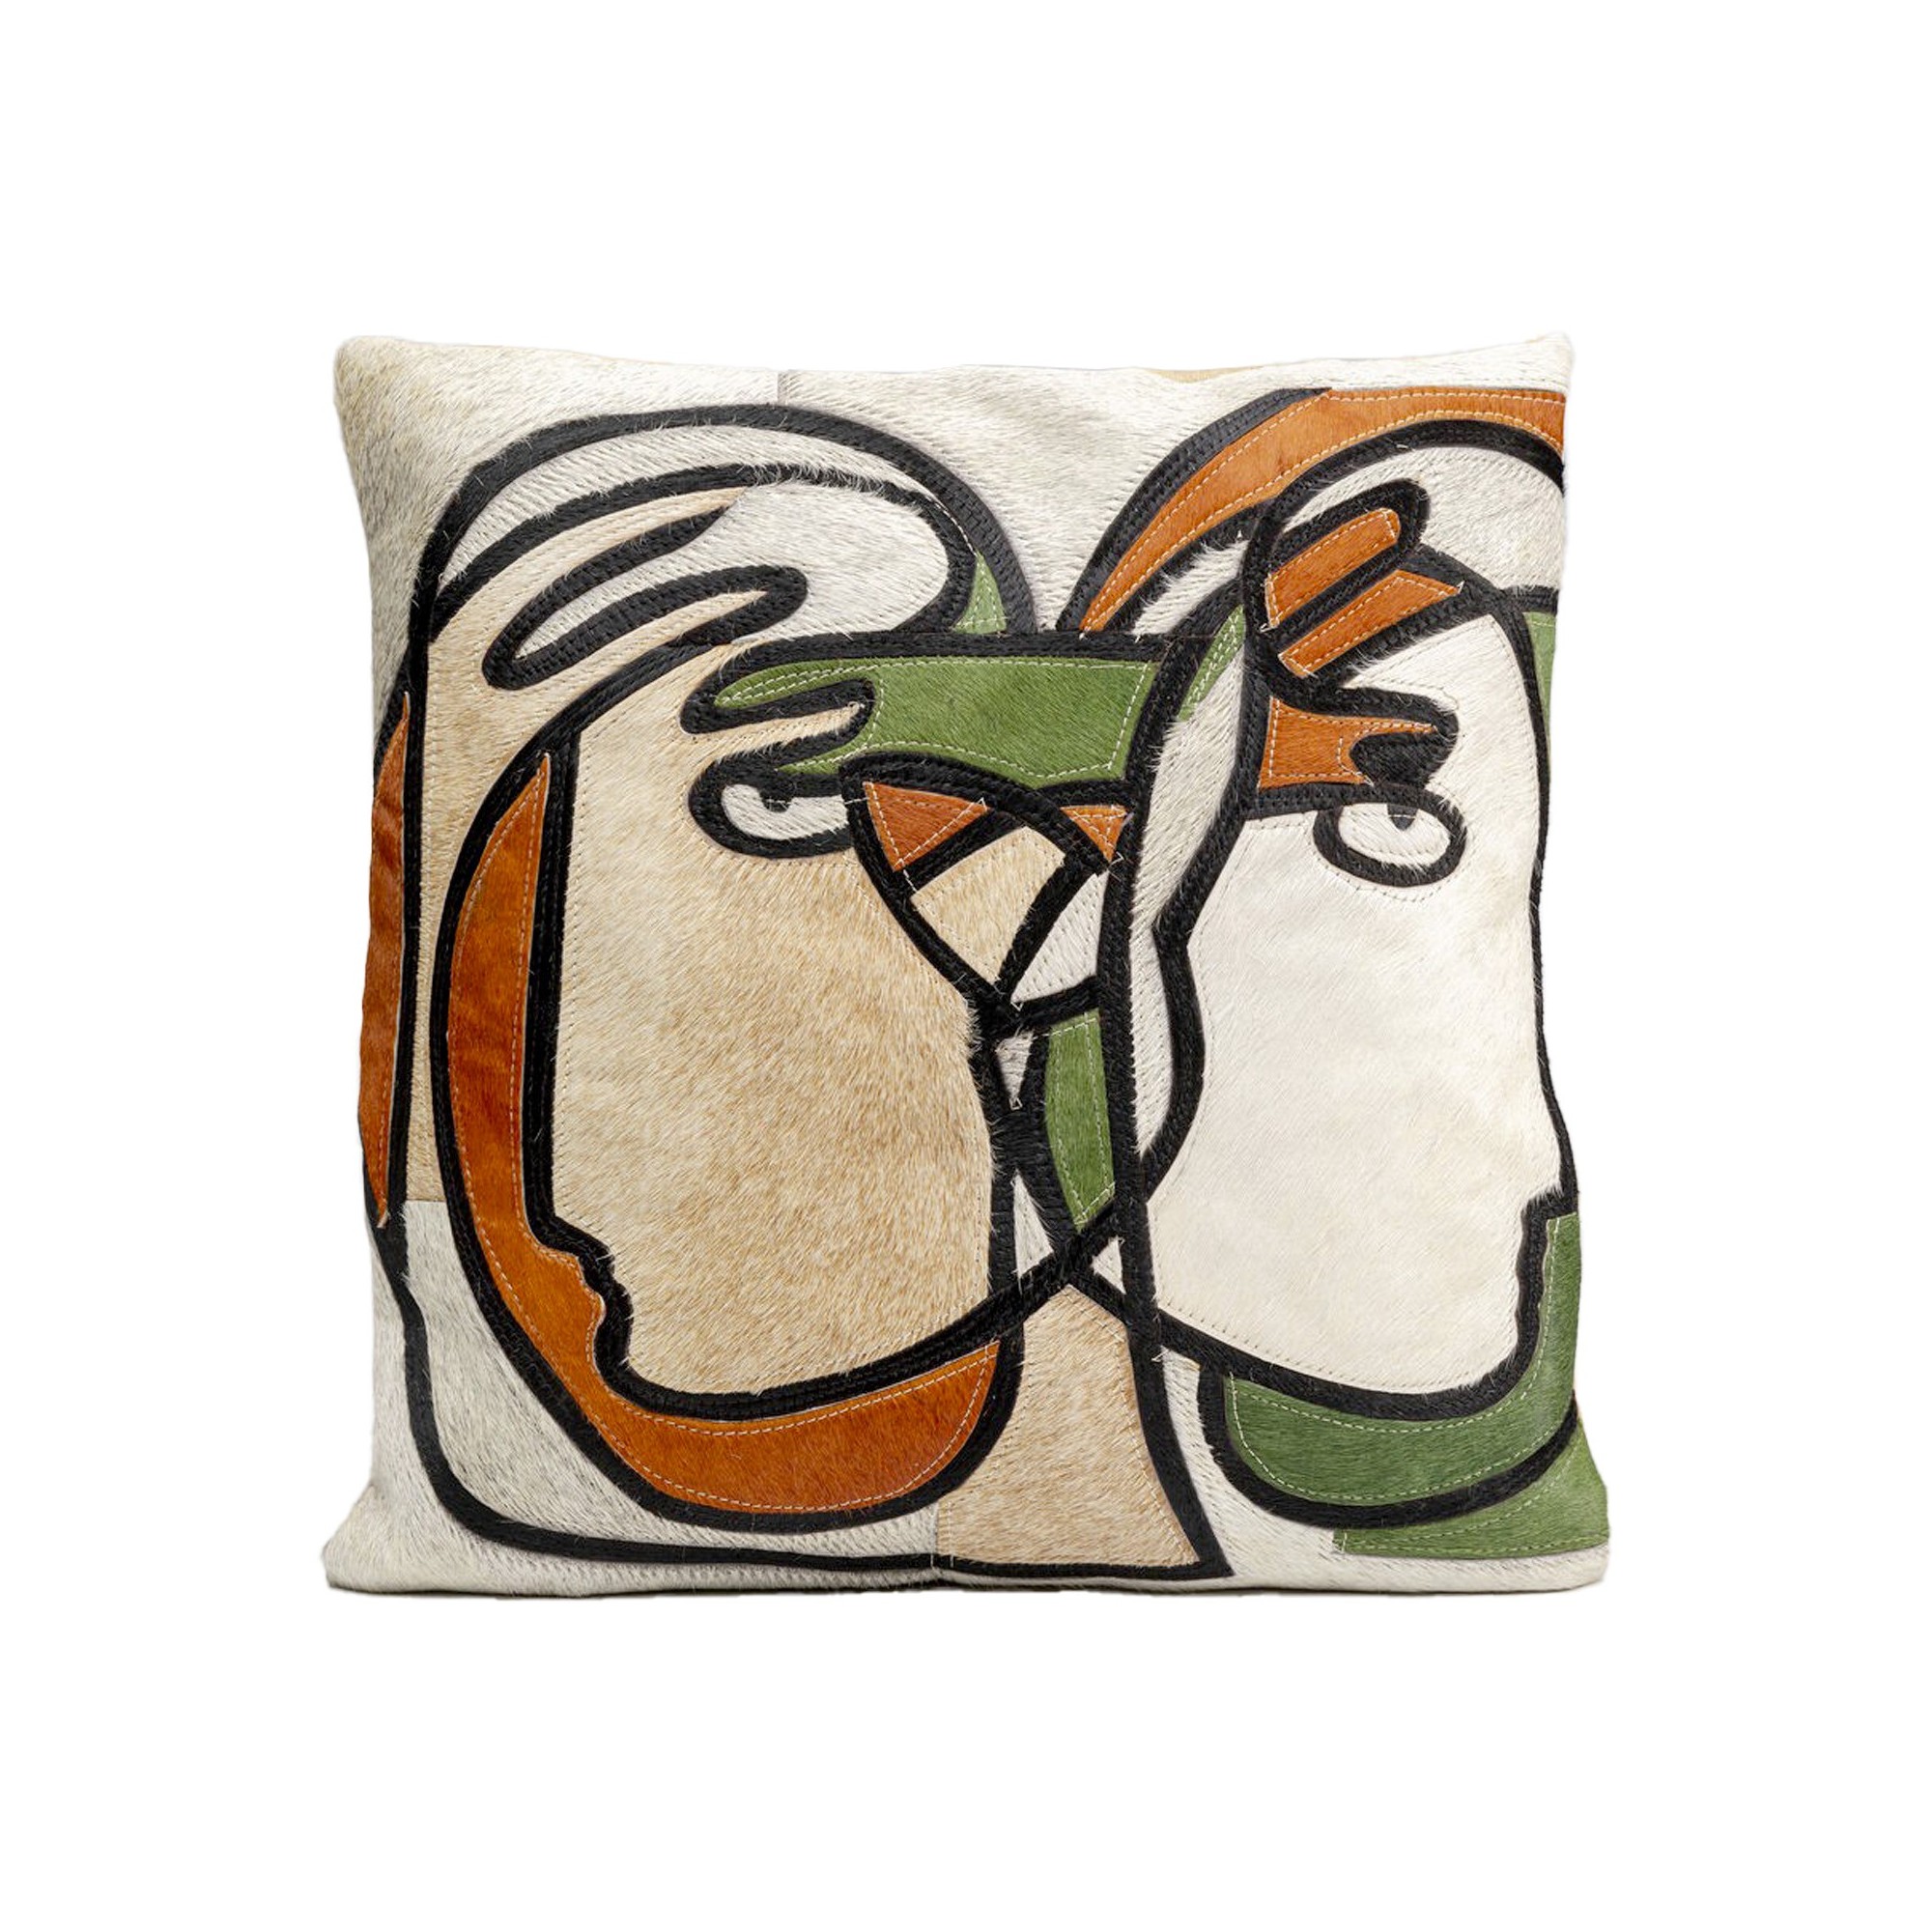 Coussin Thoughts Faces Kare Design